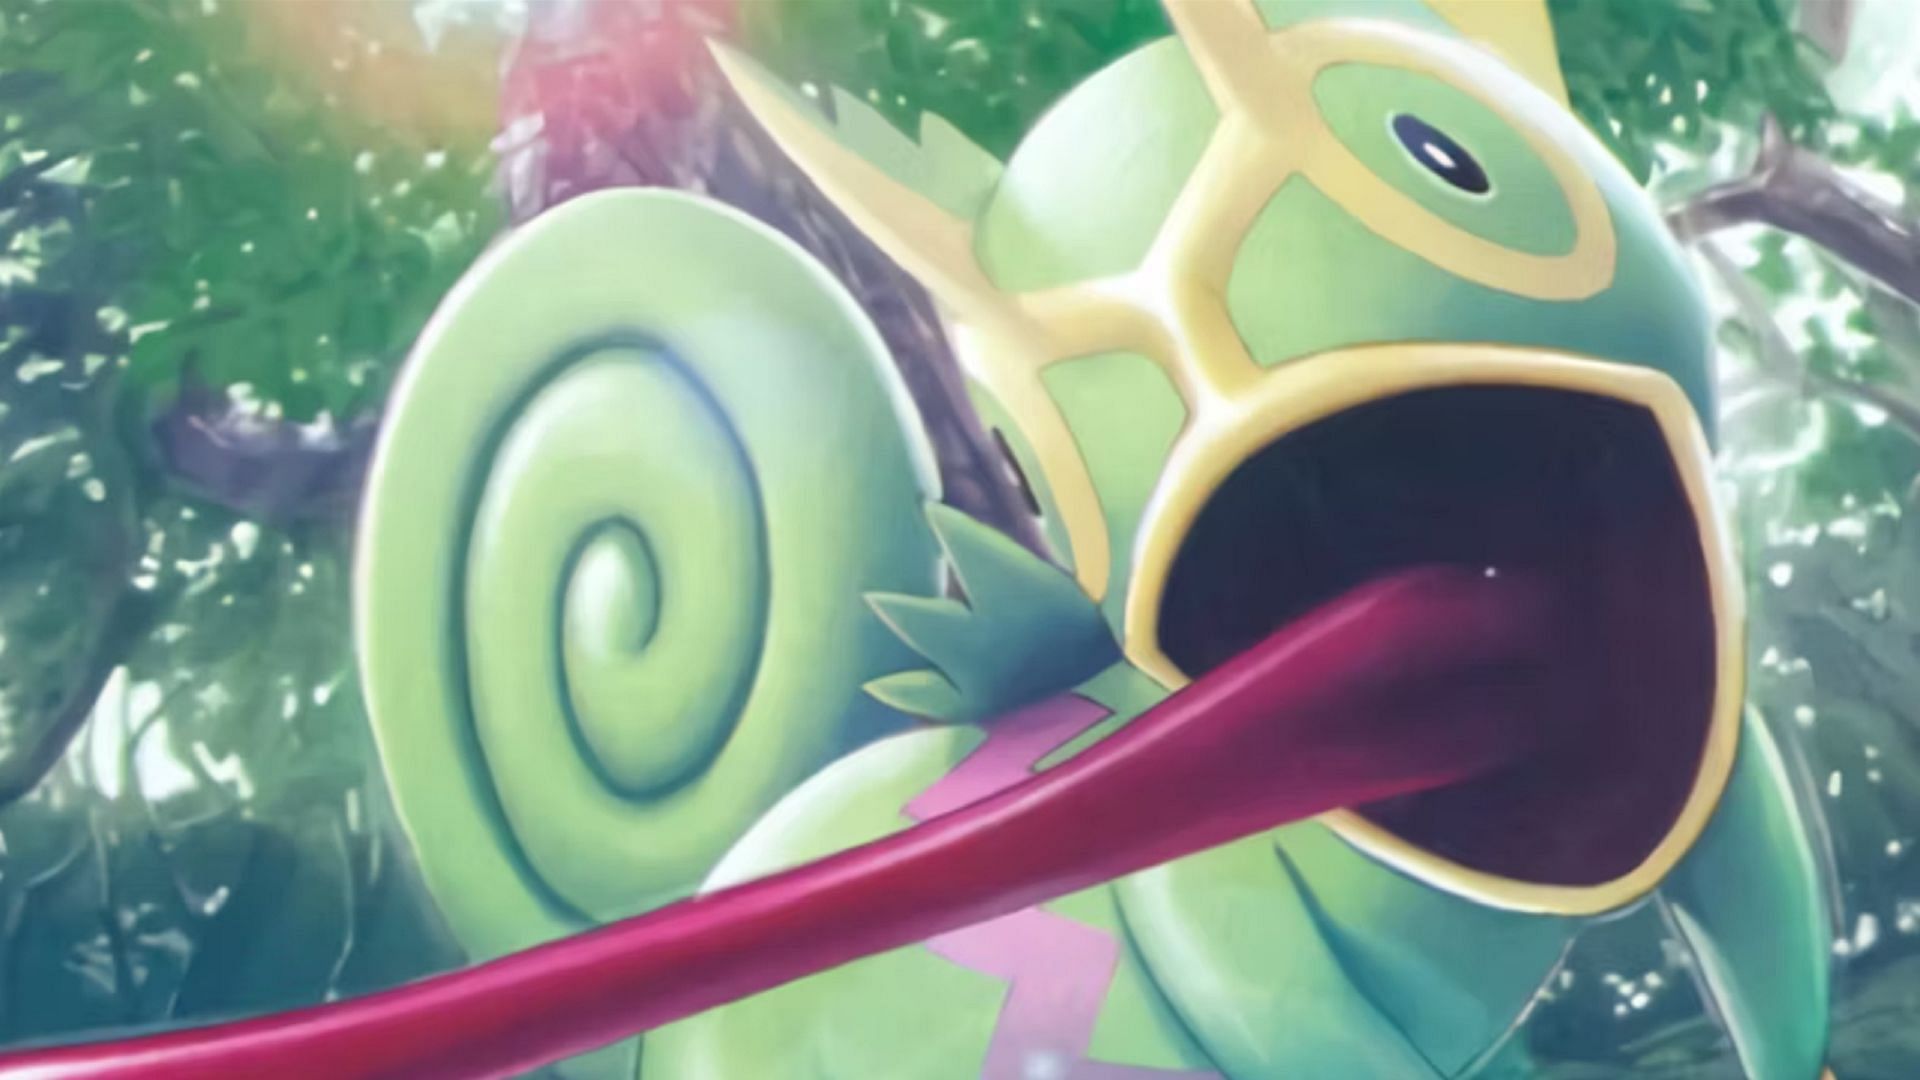 Kecleon has been suspiciously absent from Pokemon GO (Image via The Pokemon Company)